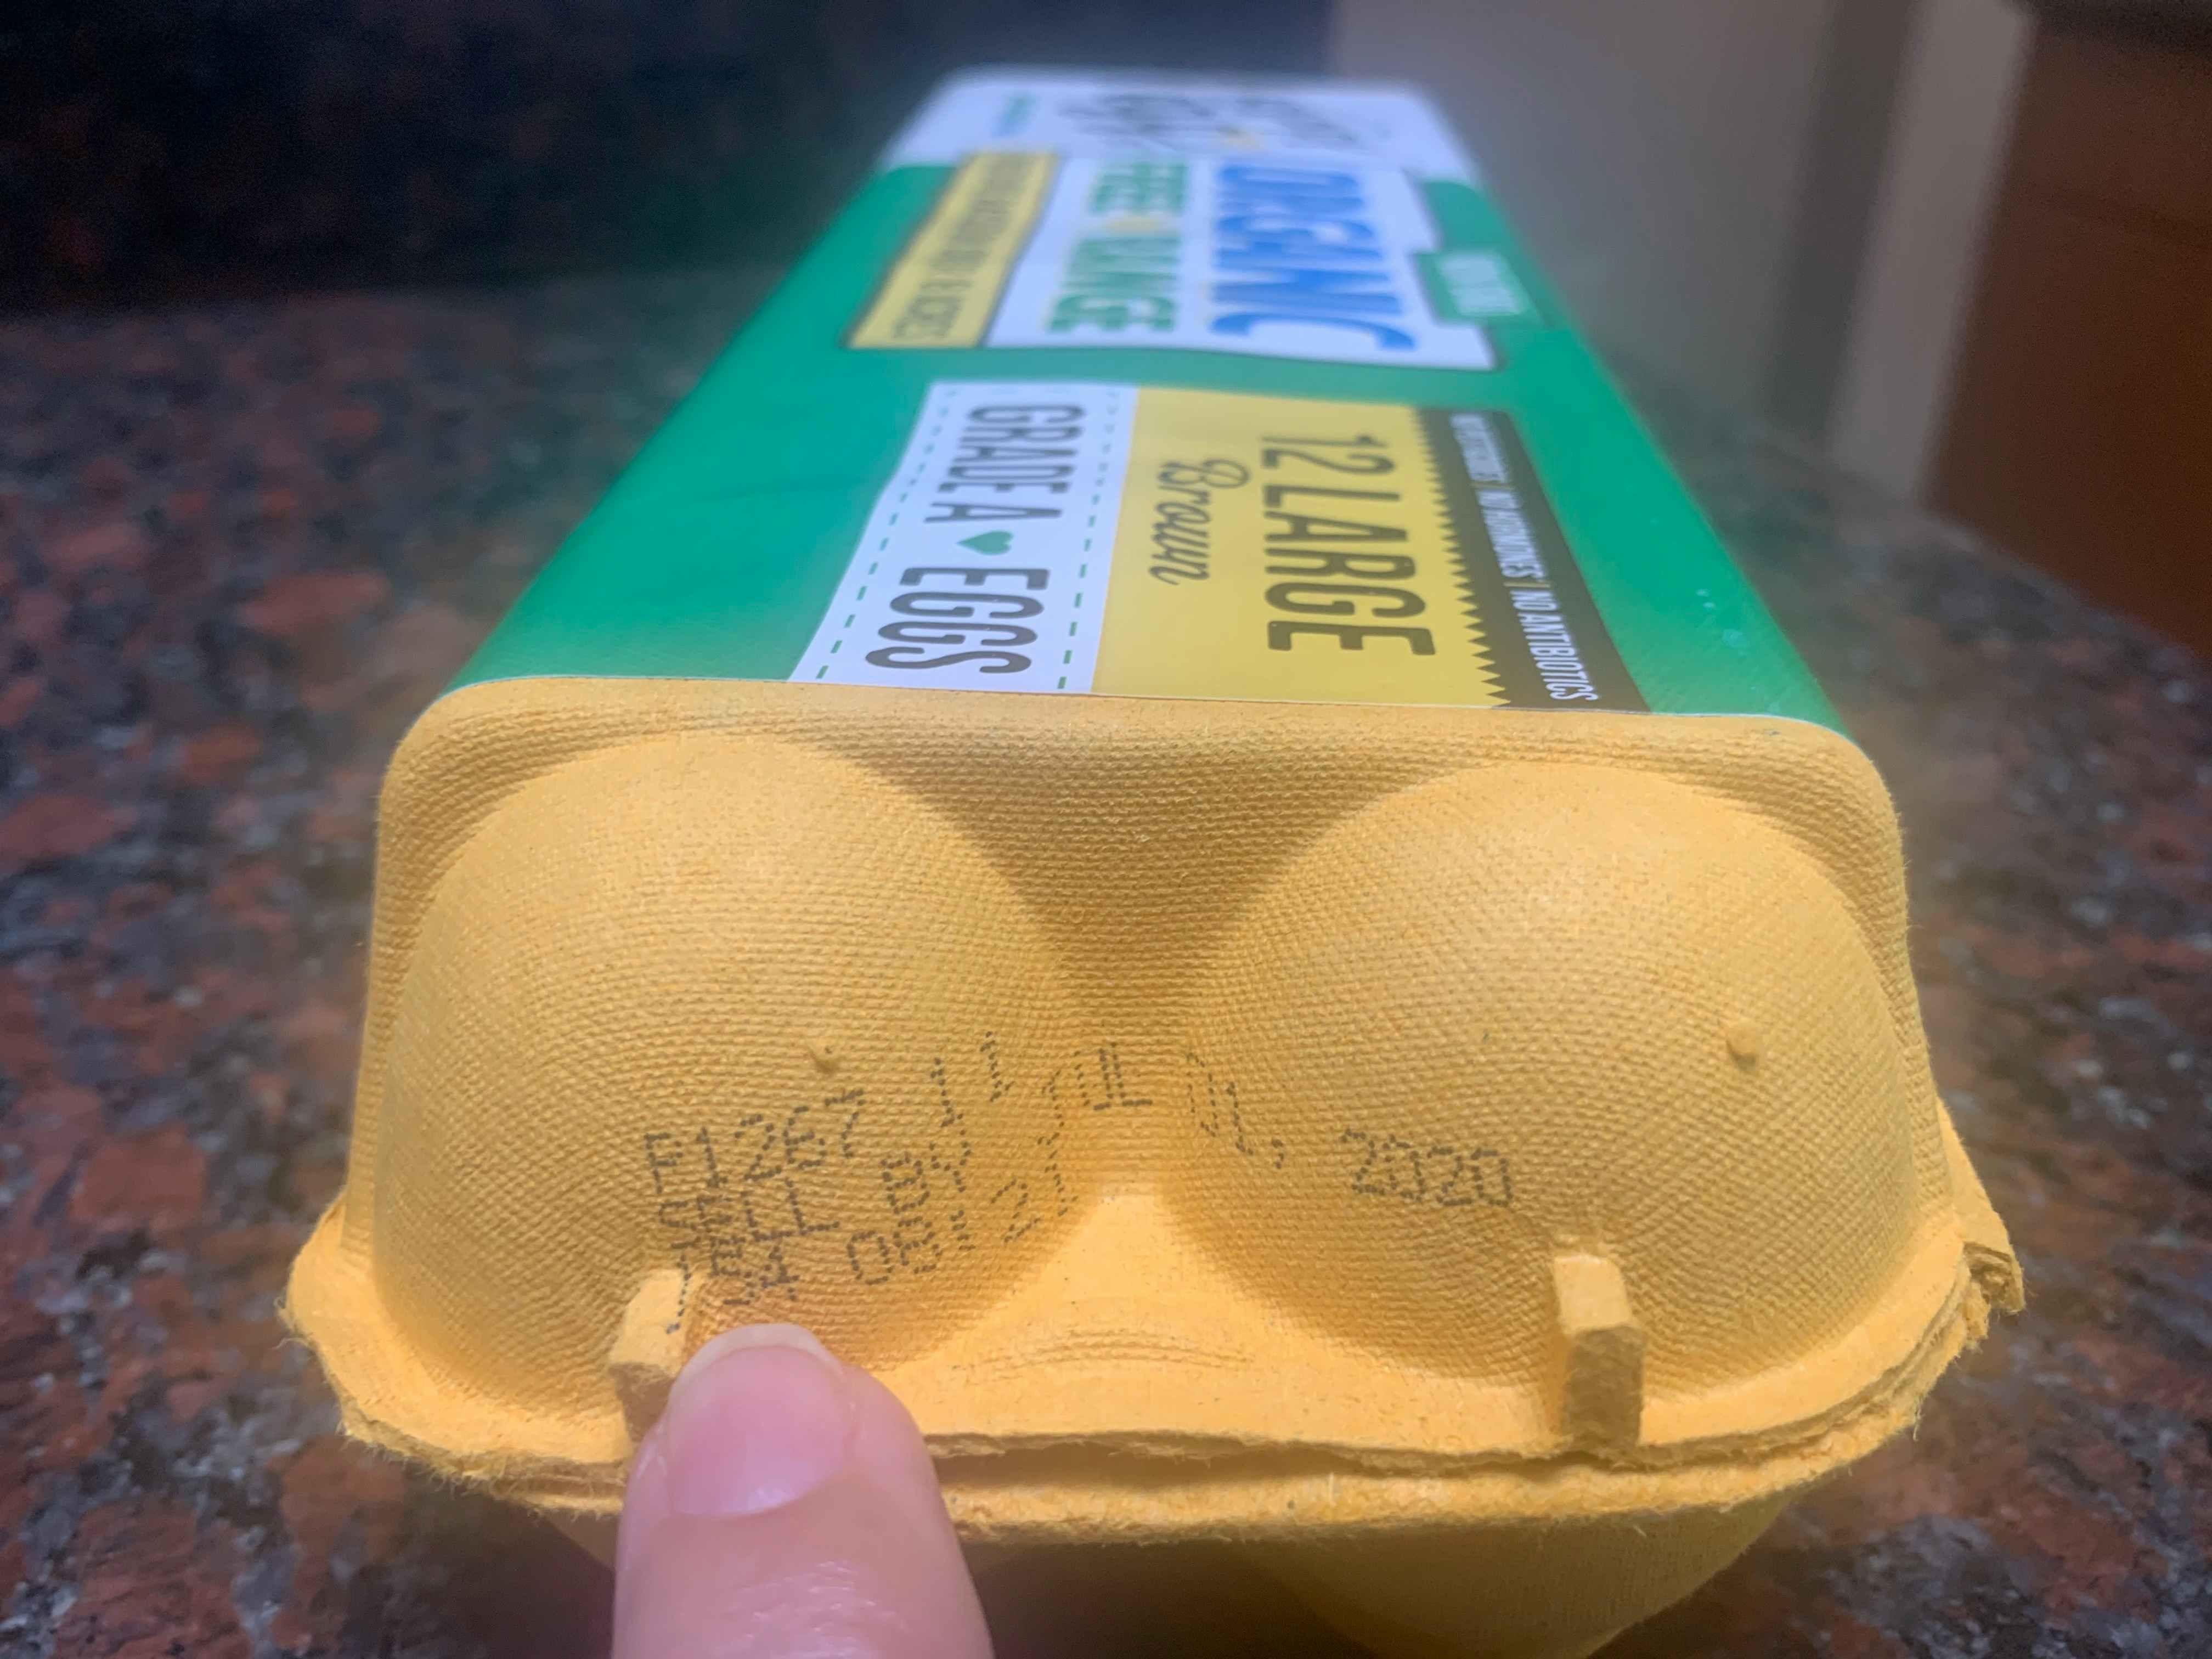 finger points to a sell by date stamped on egg carton